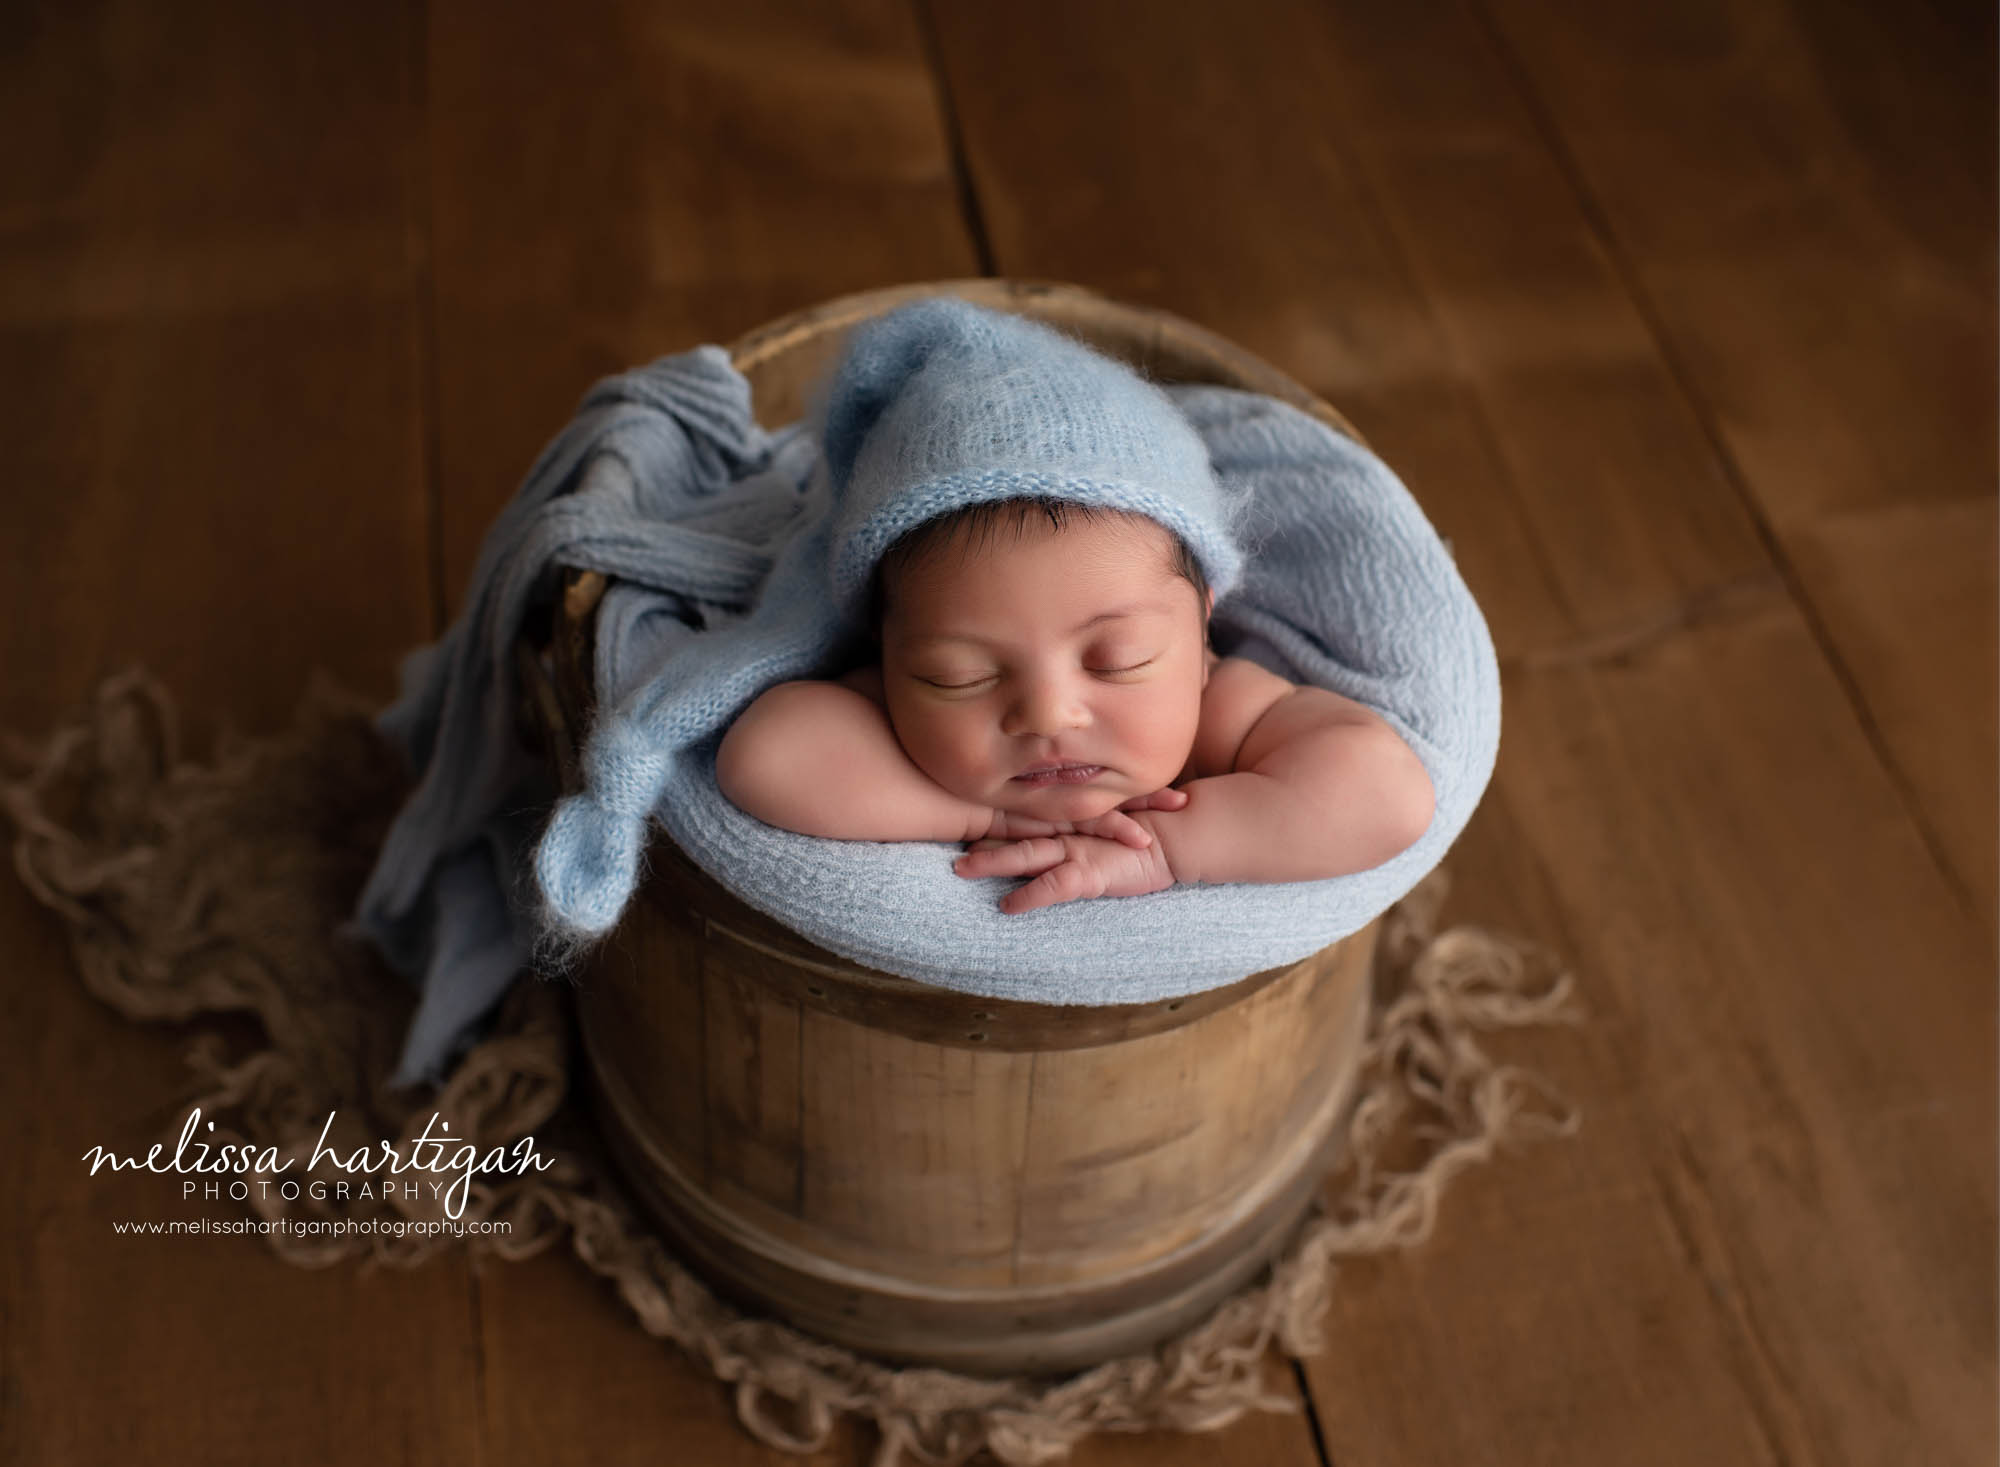 Baby boy posed in rustic wooden bucket with light blue kitted sleepy cap and wrap